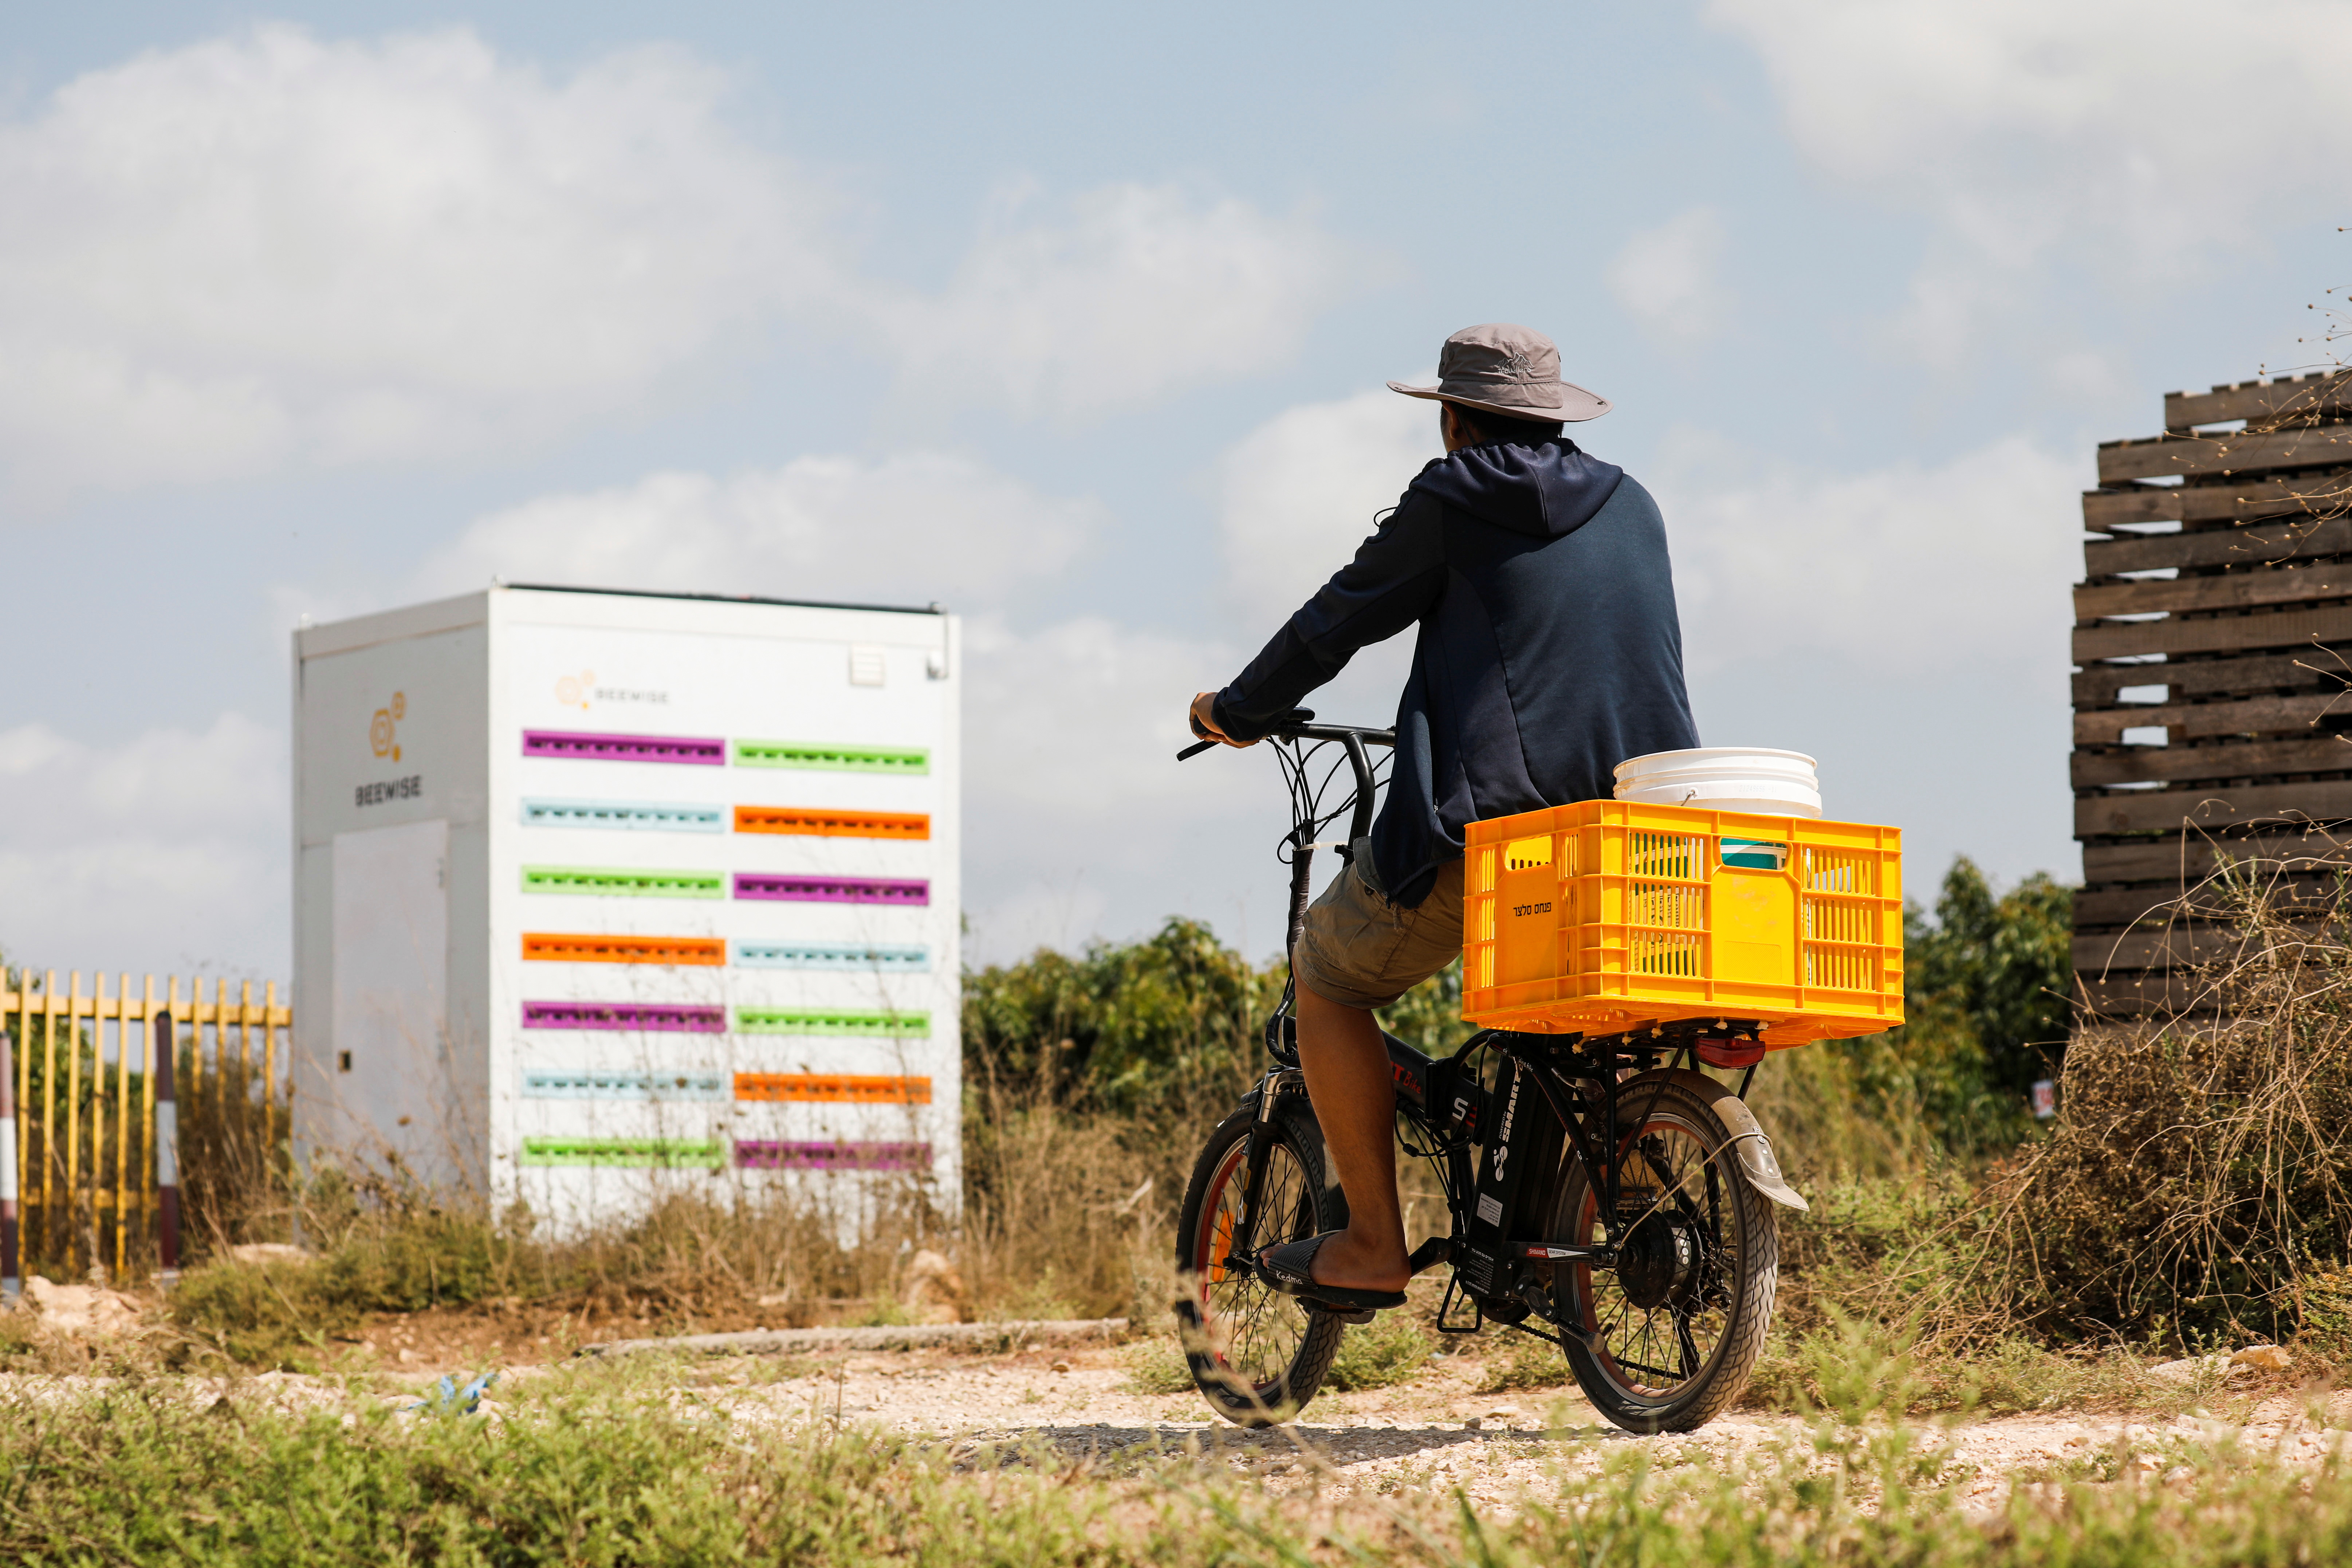 A man cycles next to a robotic beehive, developed by Israeli startup Beewise, in Beit Haemek